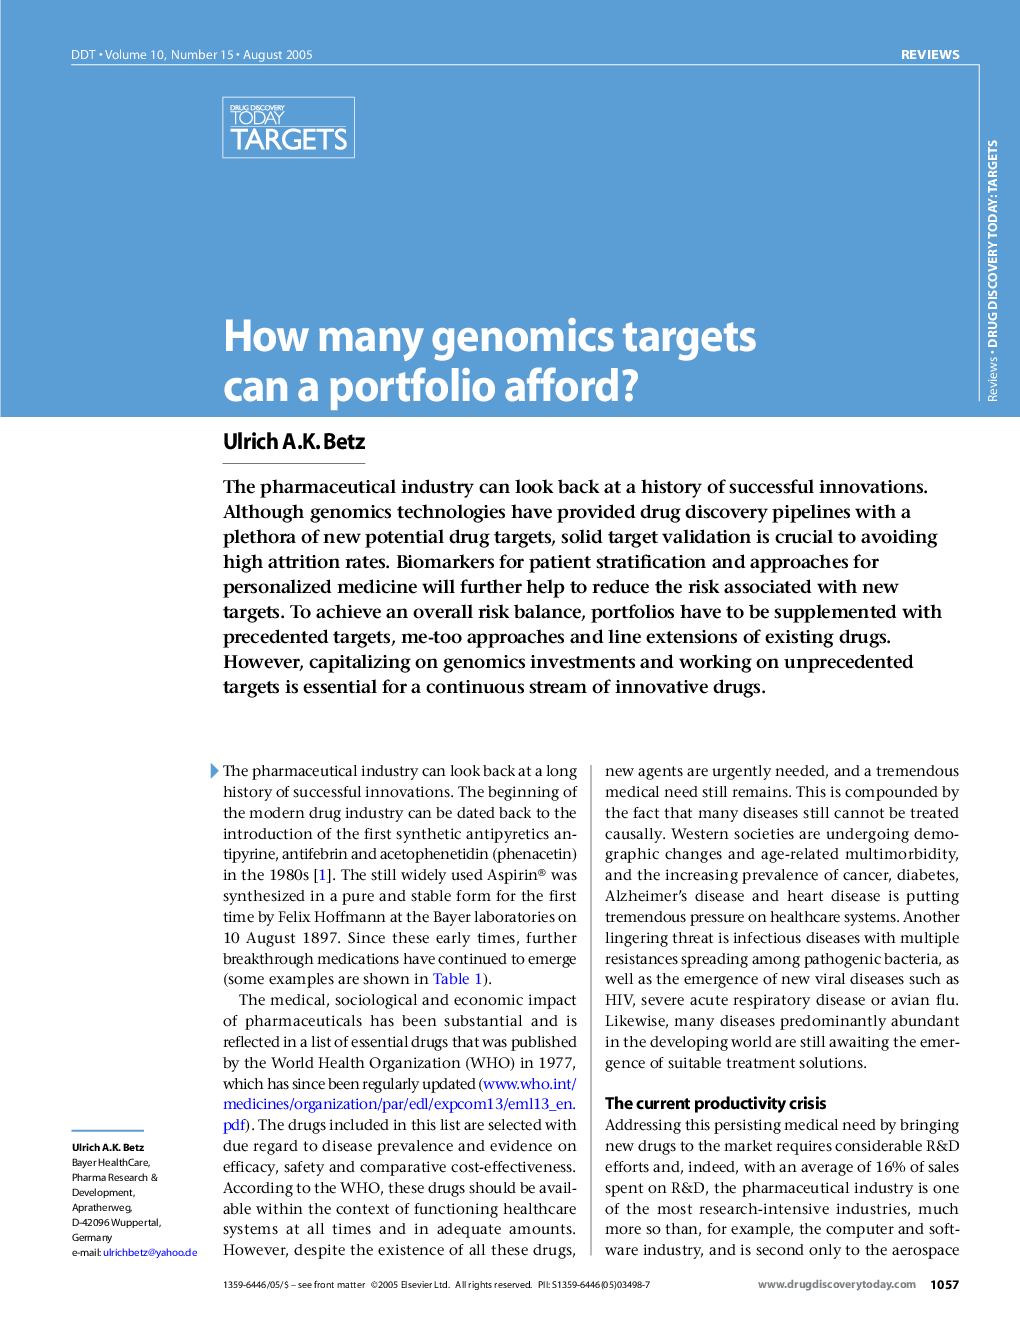 How many genomics targets can a portfolio afford?